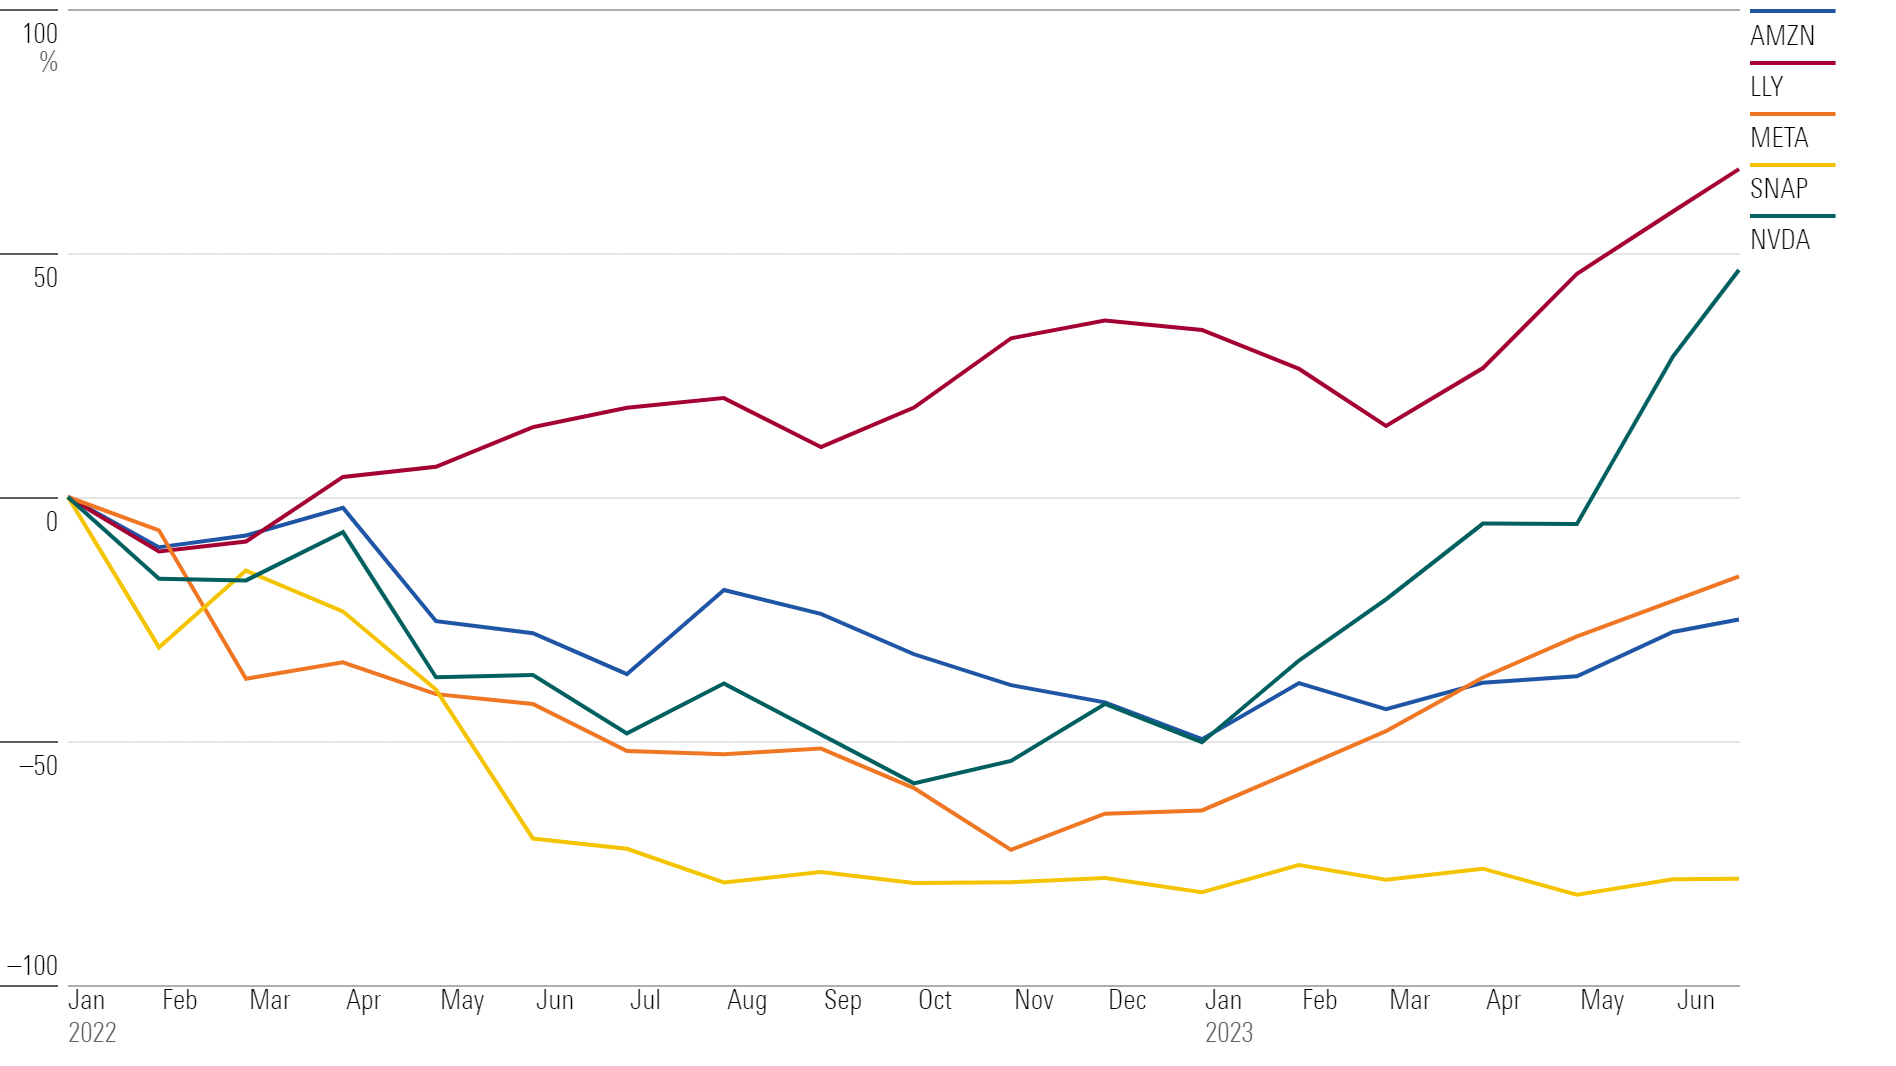 line chart showing performance of Amazon, Eli Lily, Meta Playforms, Nvidia and Snap